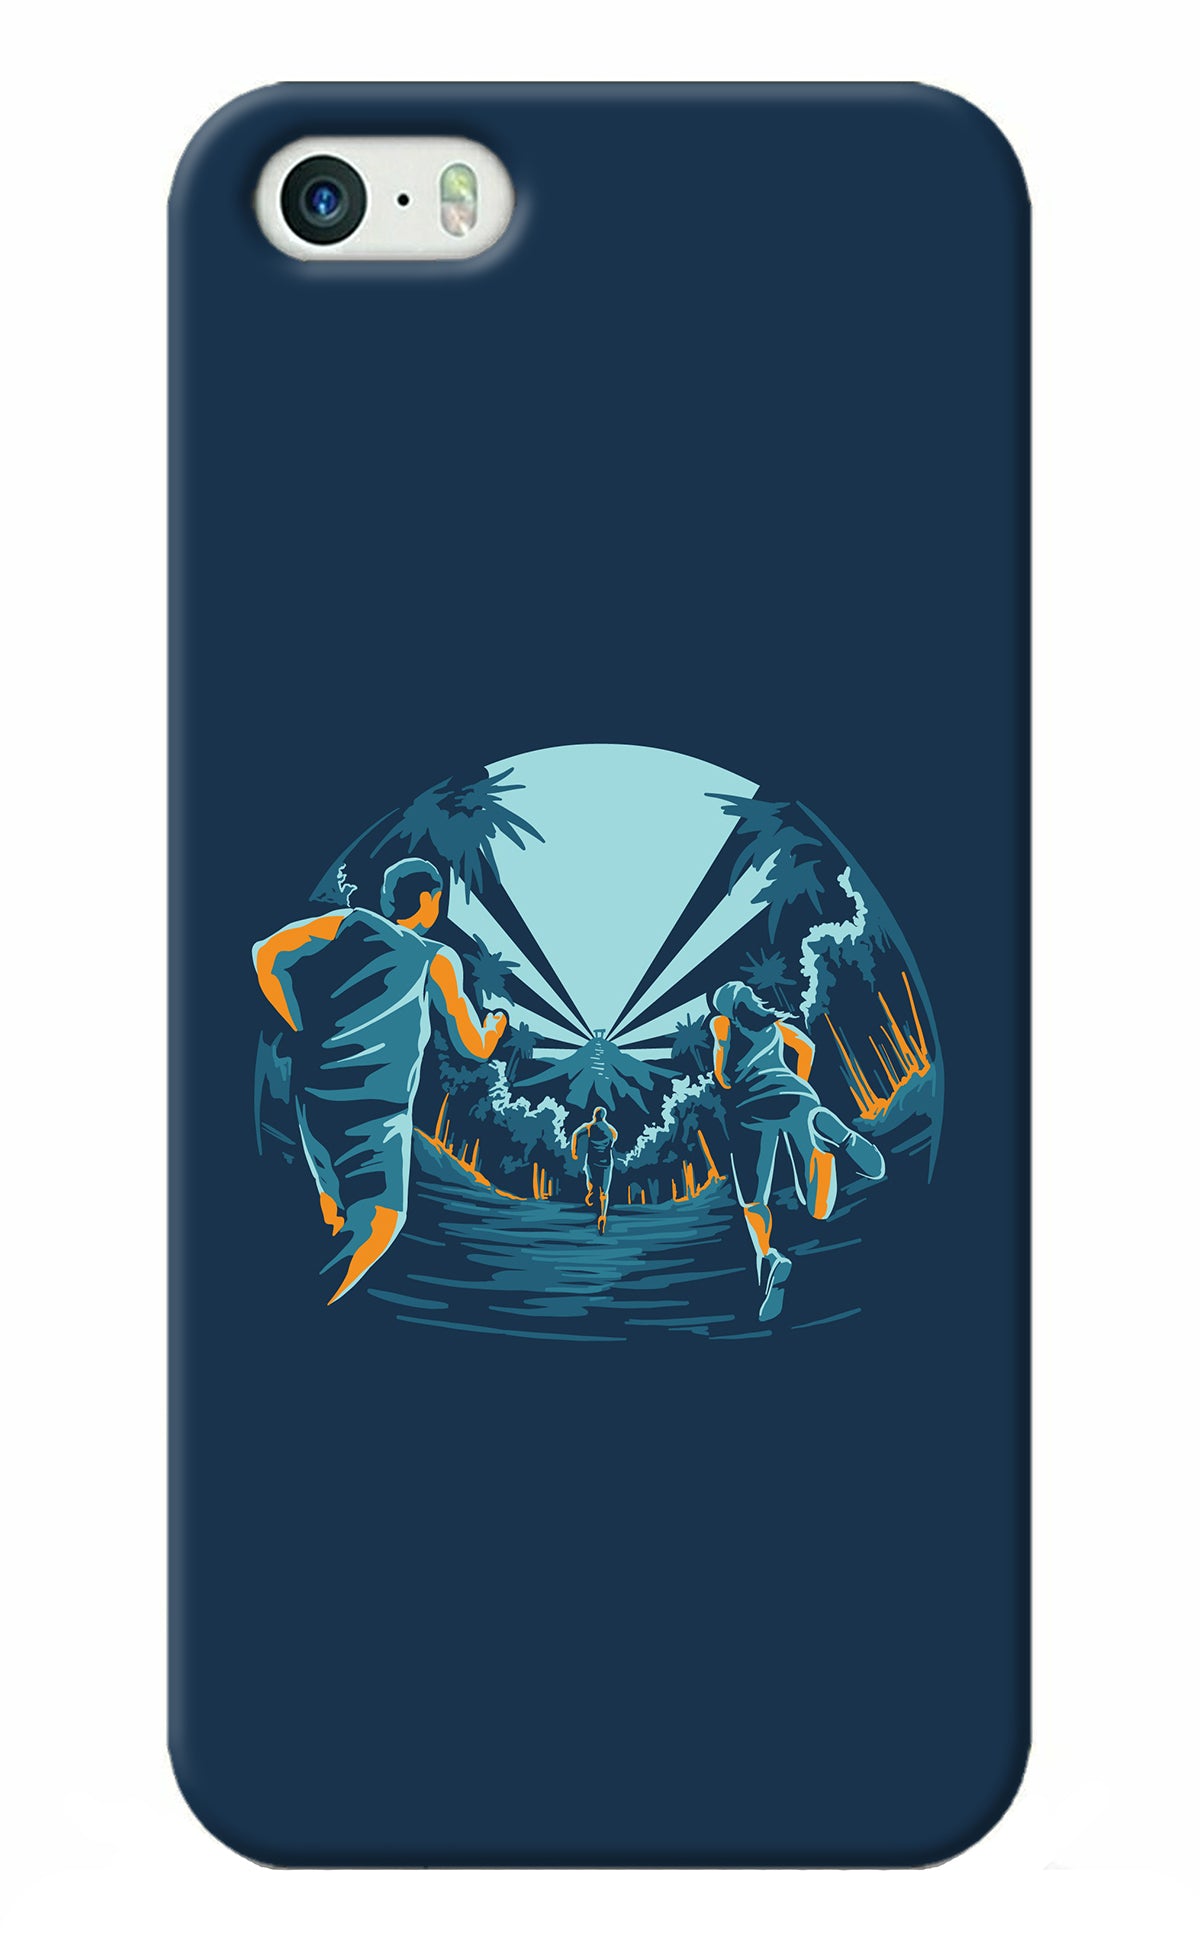 Team Run iPhone 5/5s Back Cover